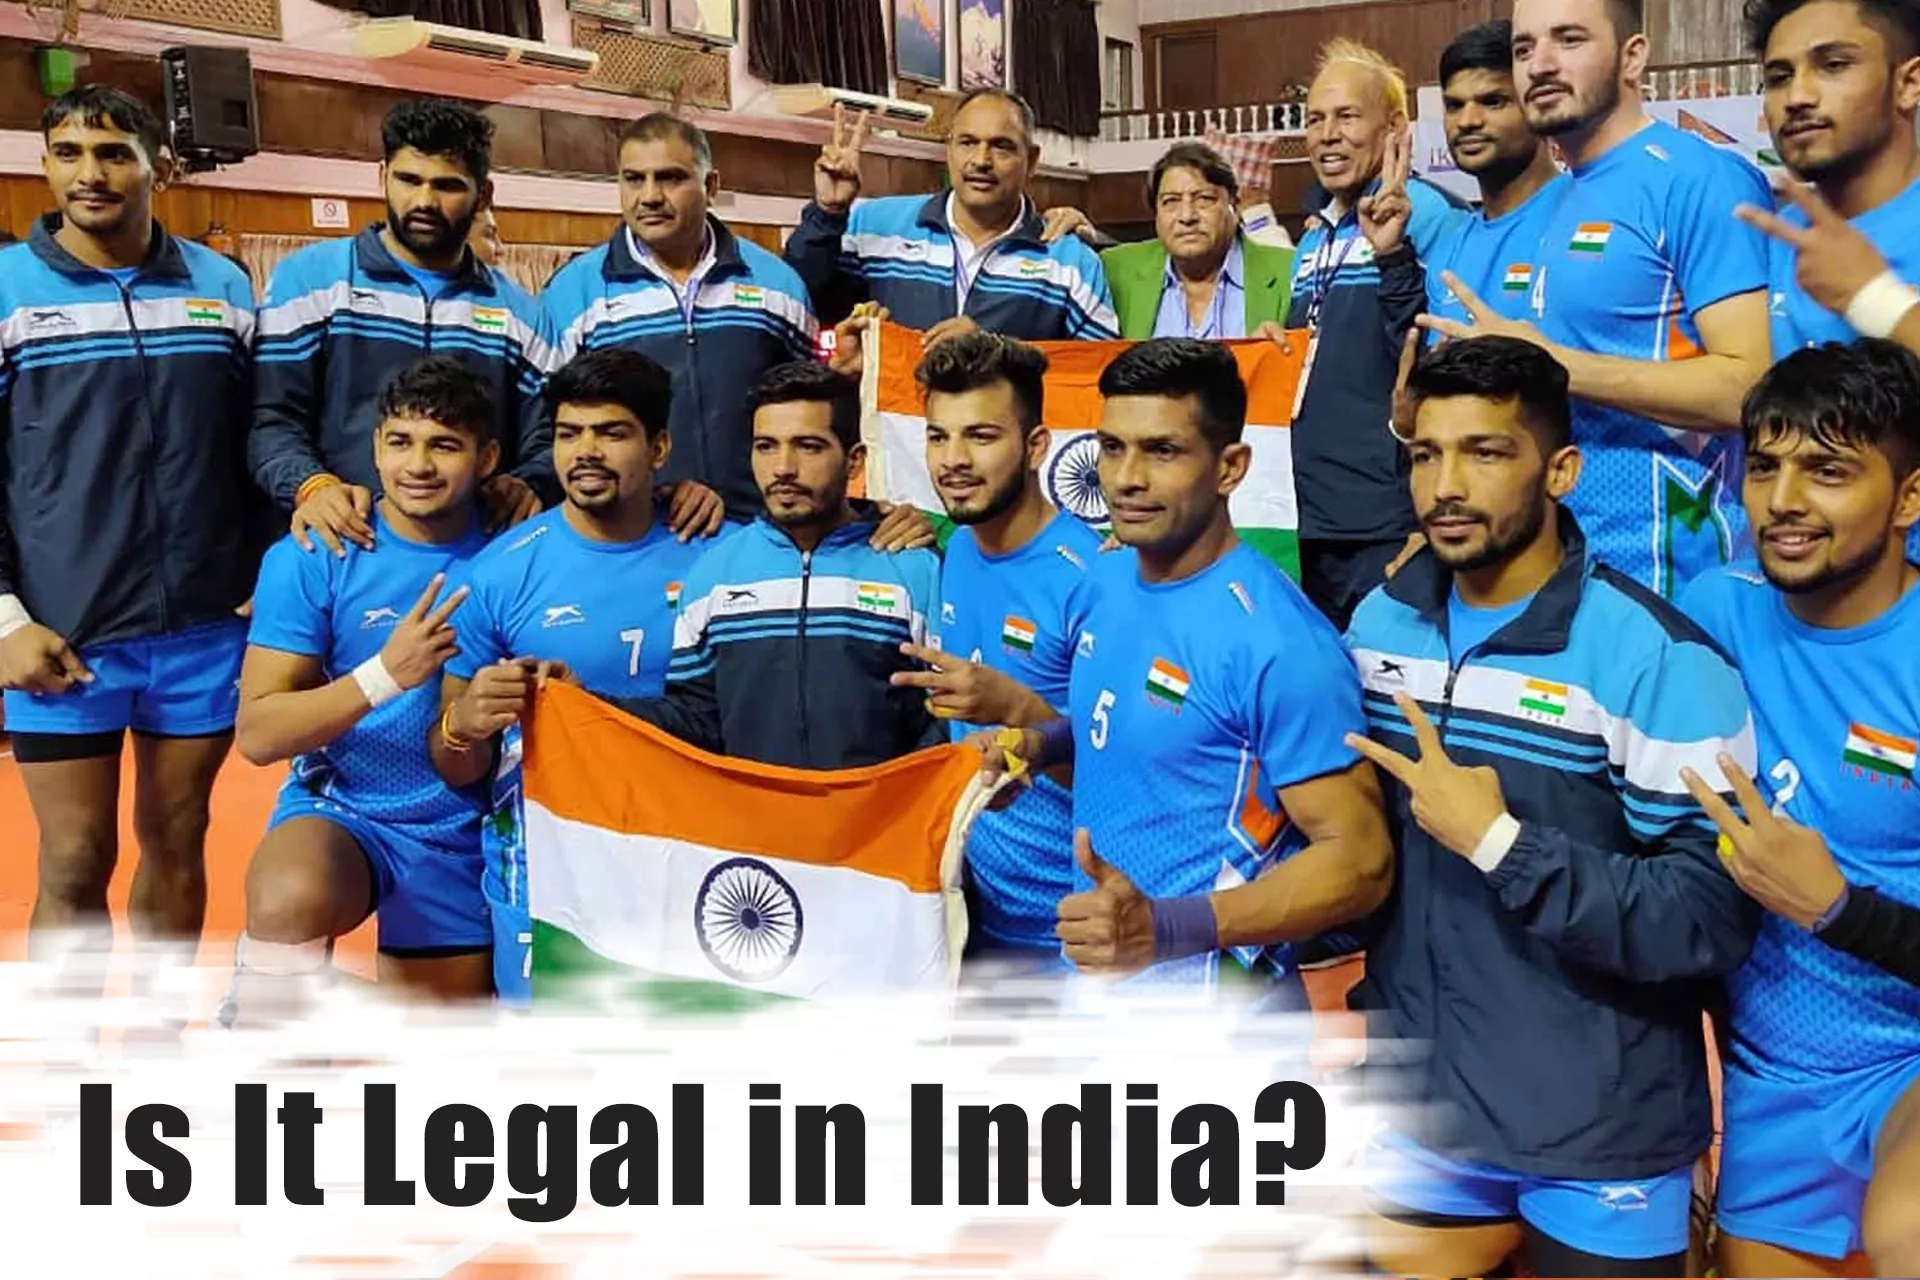 Kabaddi betting is legal when you bet online.